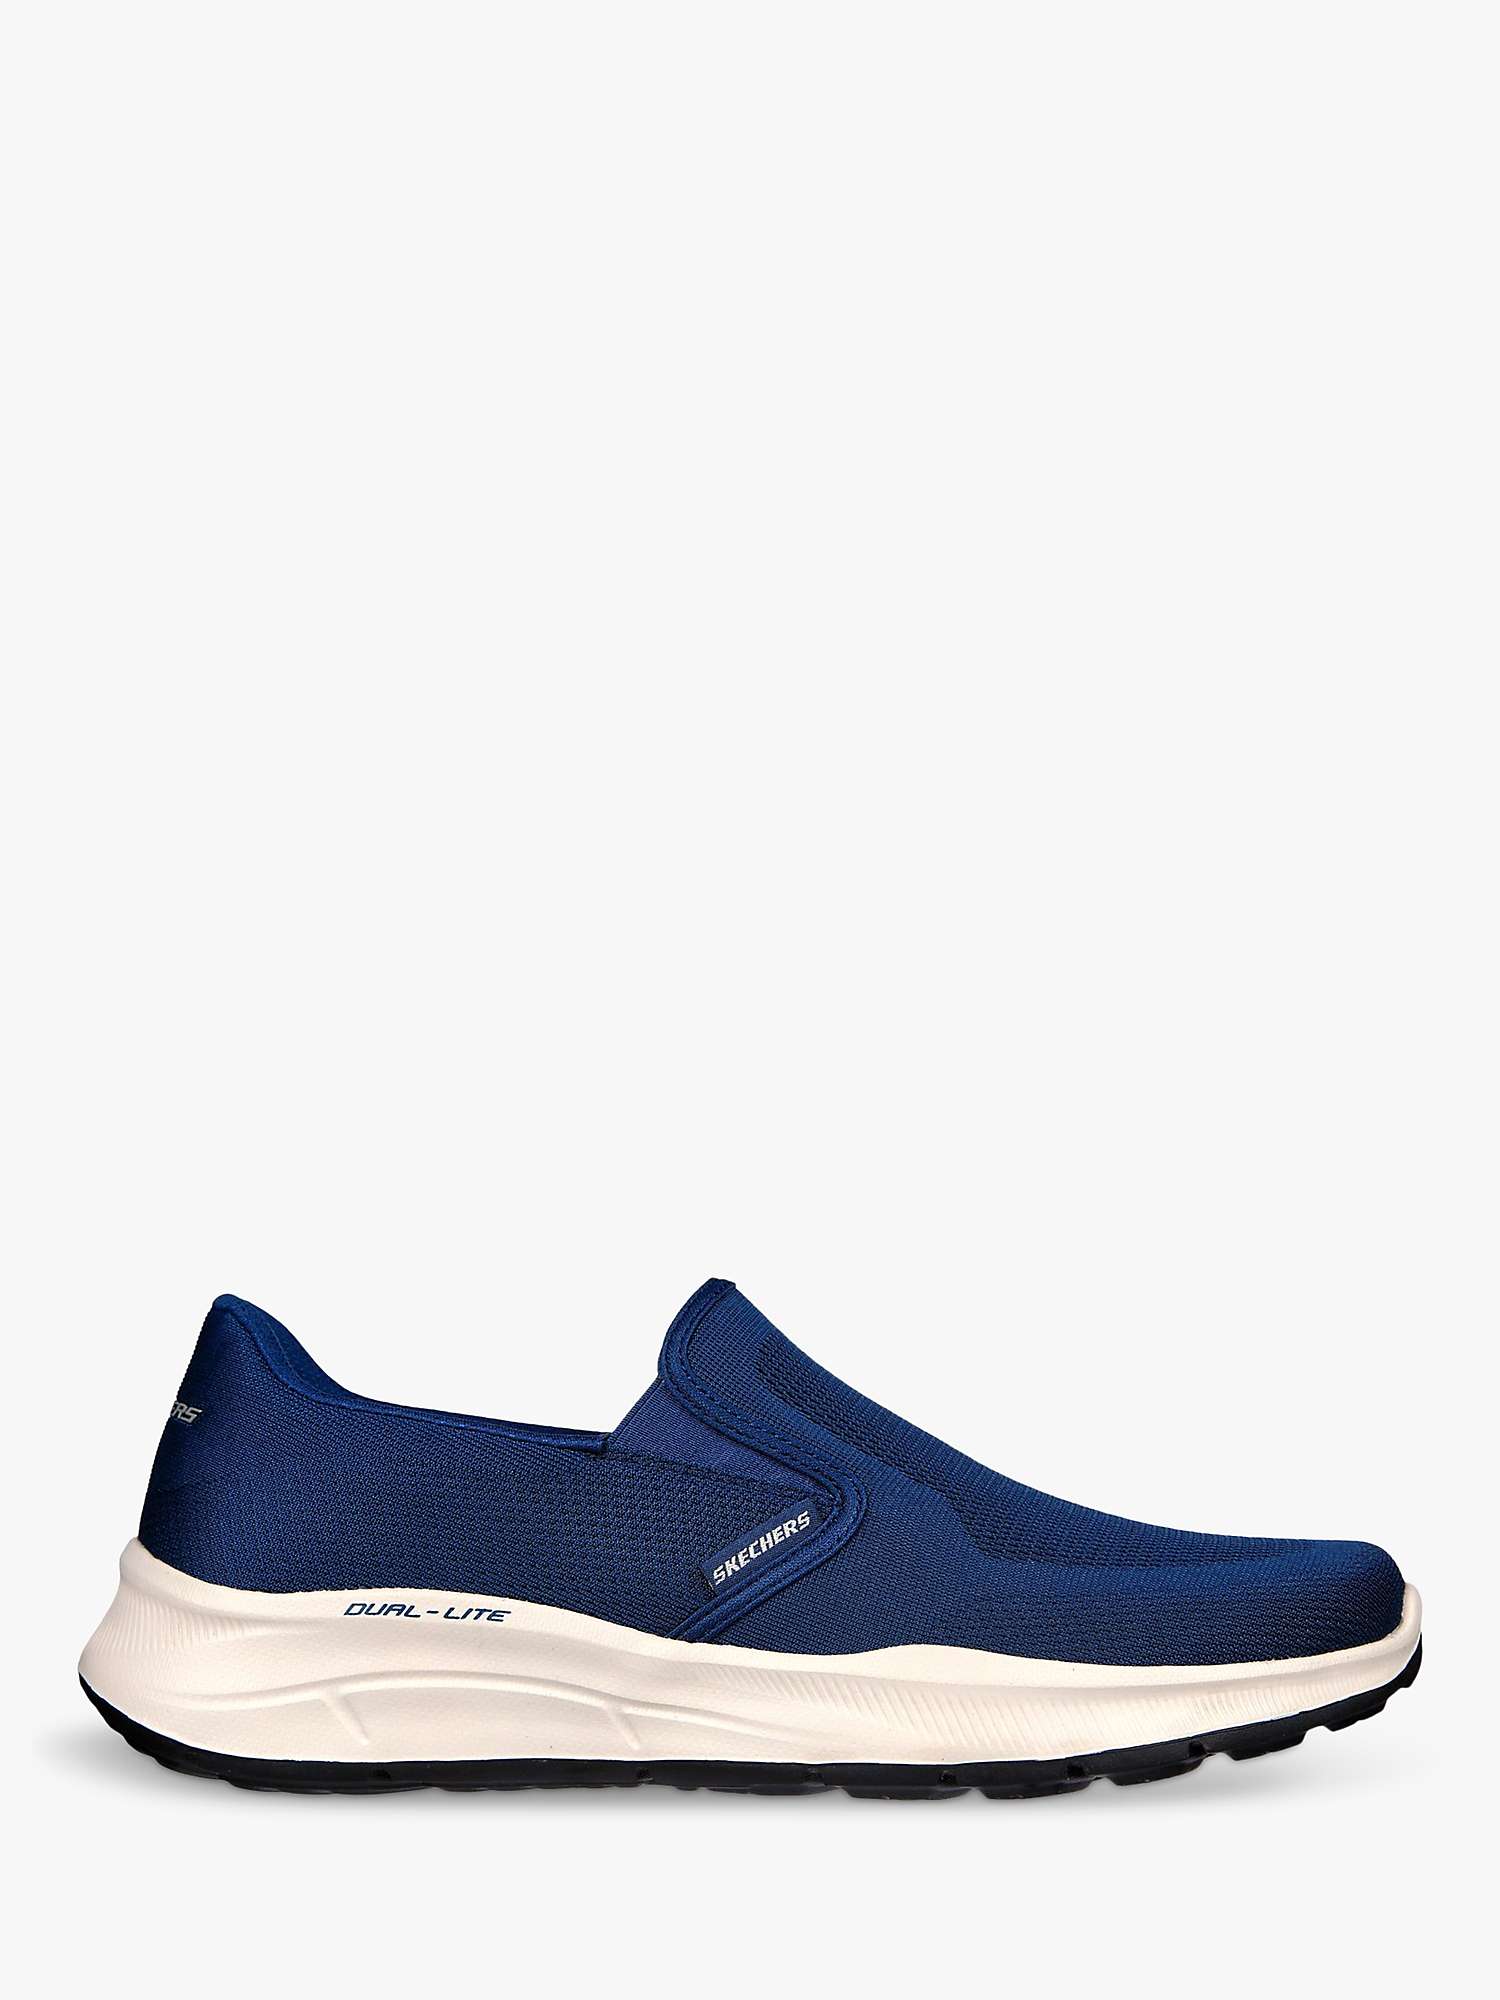 Buy Skechers Equalizer 5.0 Grand Legacy Trainers Online at johnlewis.com